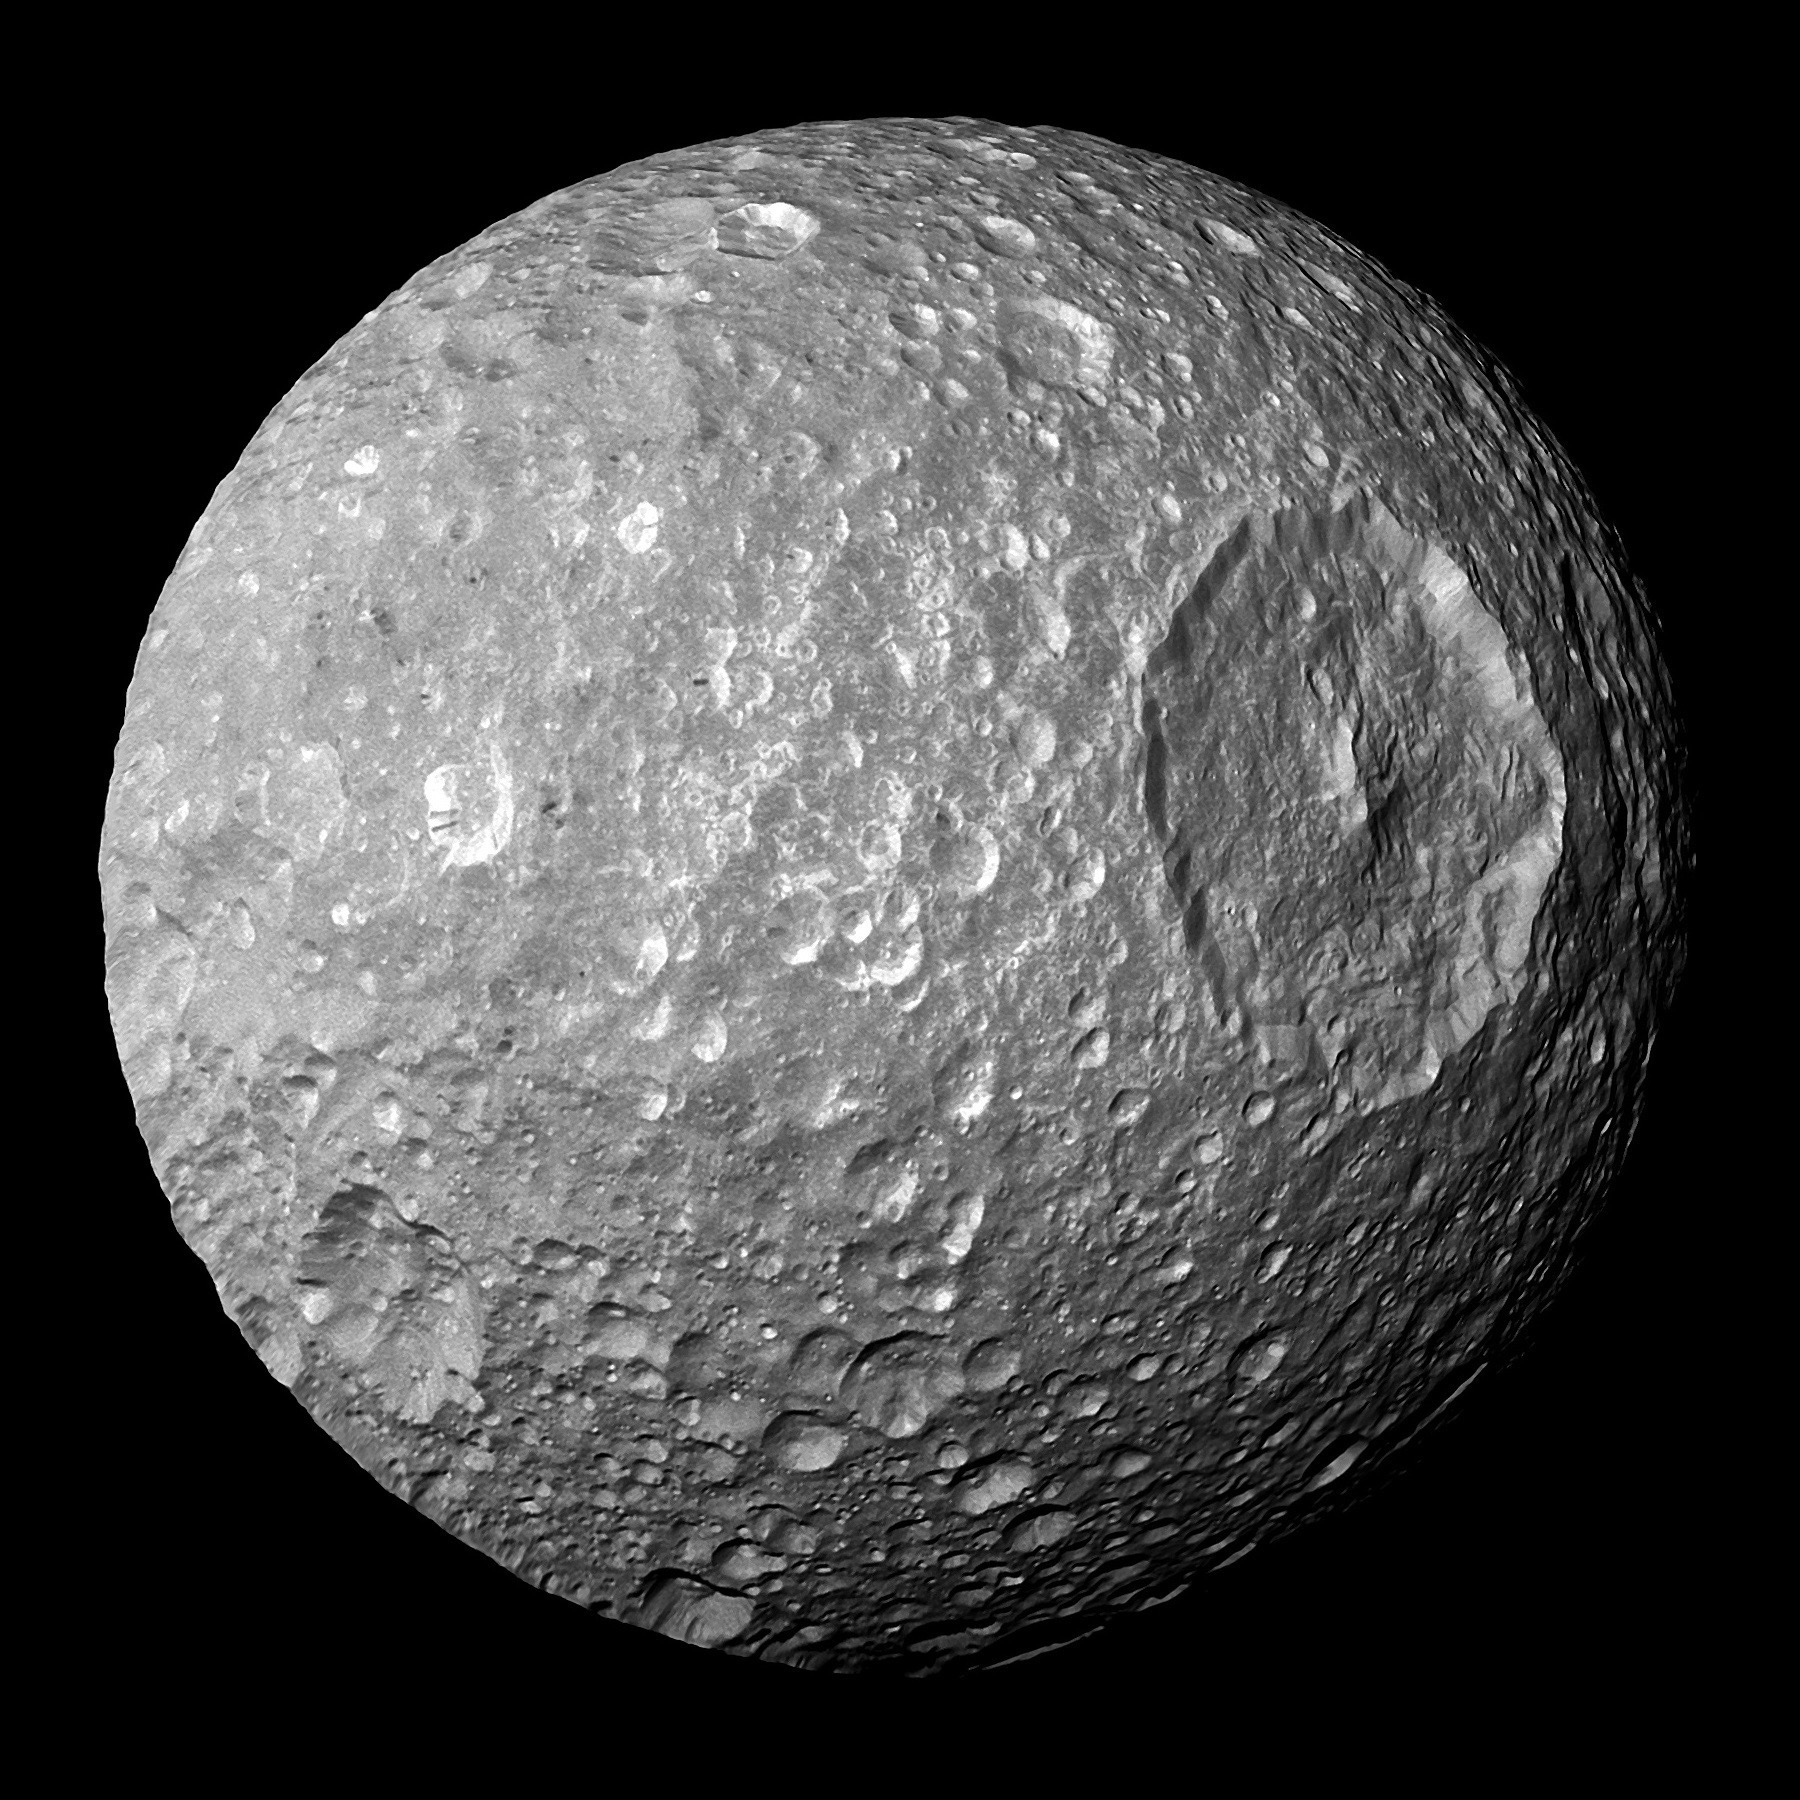 Saturn's moon Mimas, with the crater Herschel visible prominently